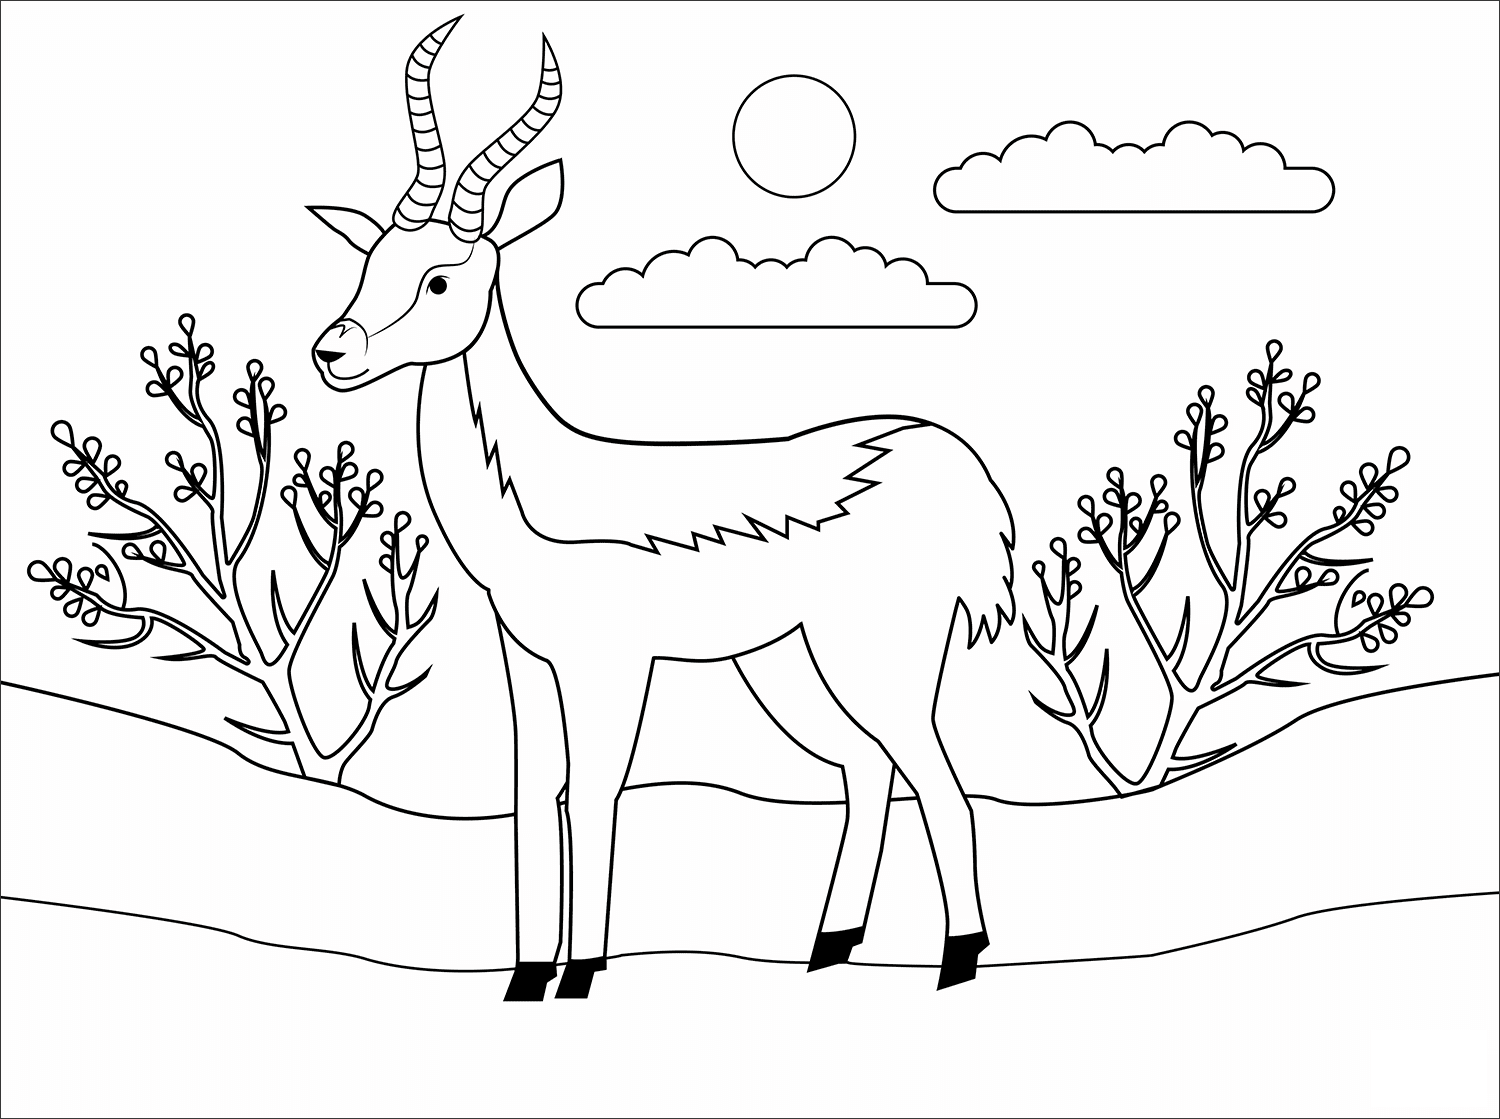 Antelope Animal Simple Coloring Page